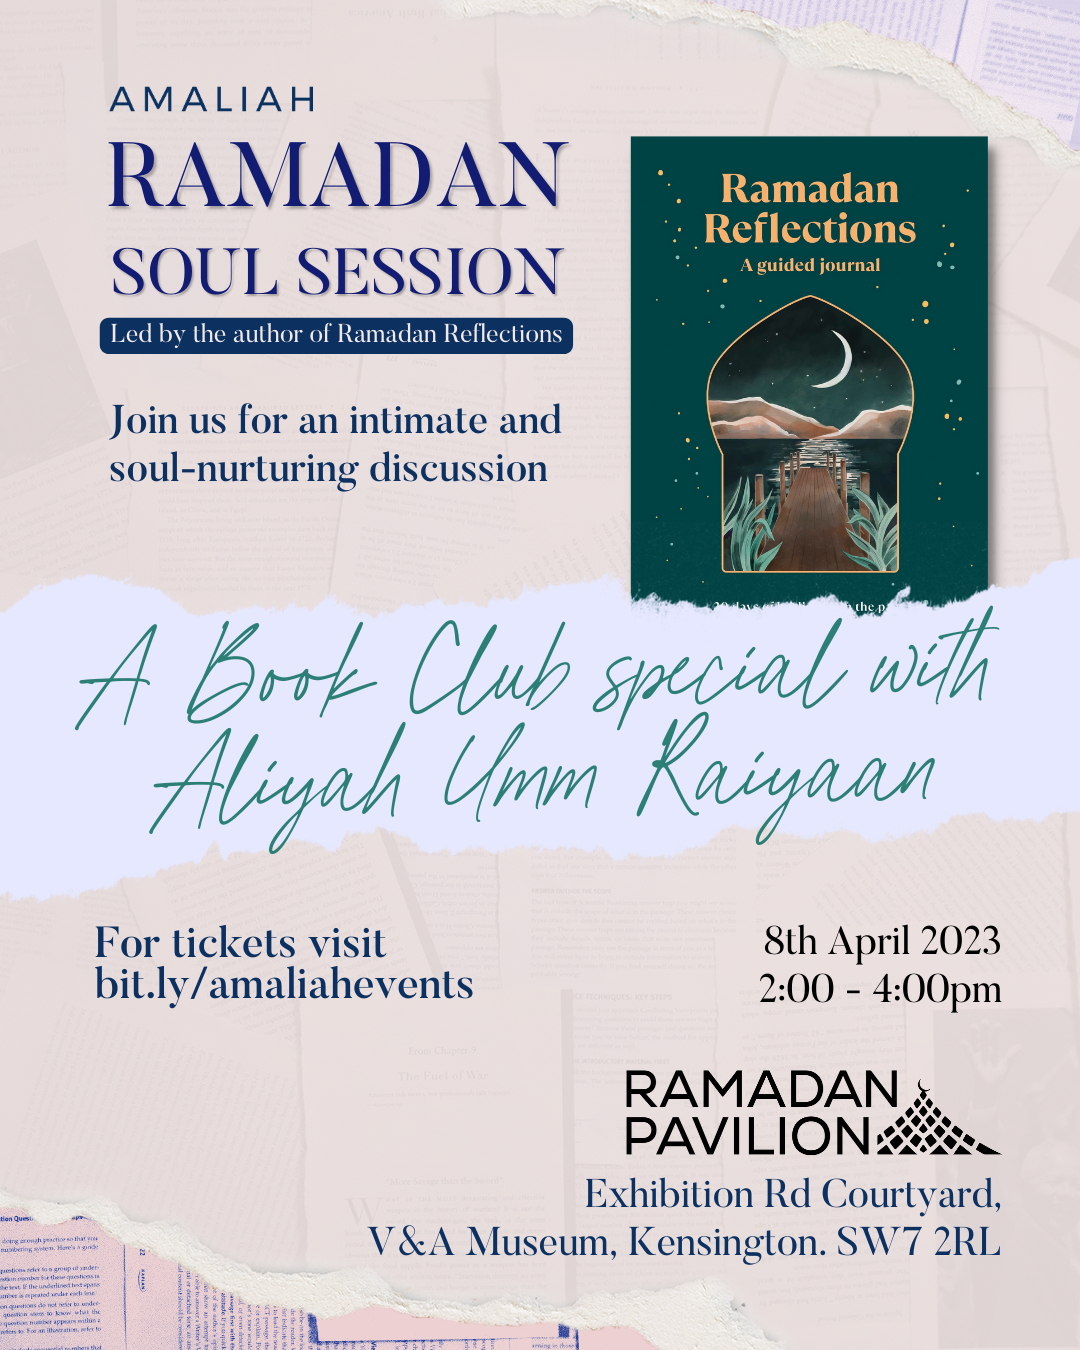 Amaliah Ramadan Soul Sessions is written with a quote.